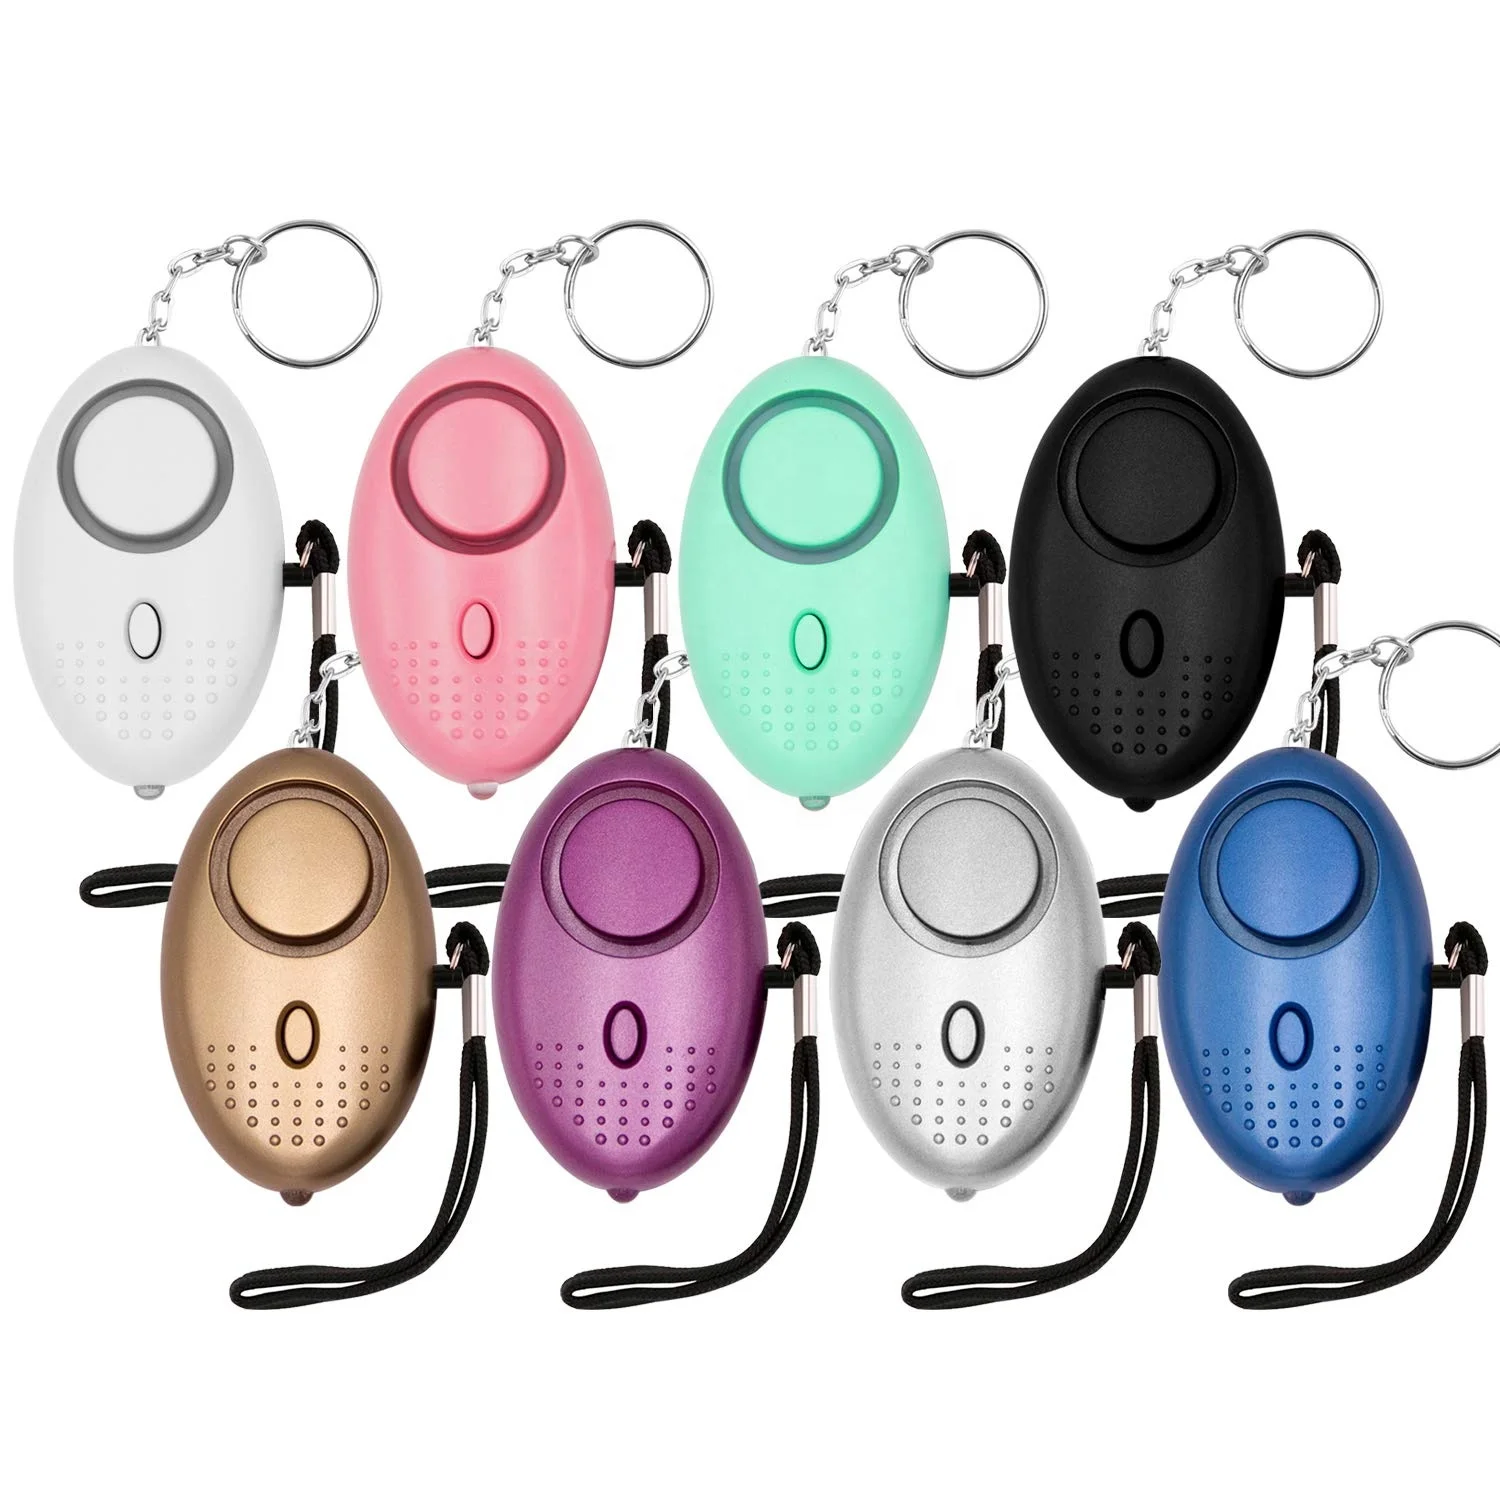 Danolt 120db Personal Security Alarm Keychain with LED Light Self-Defense Emergency Warning Alarms for Women Kids Elders Anyone in Need 